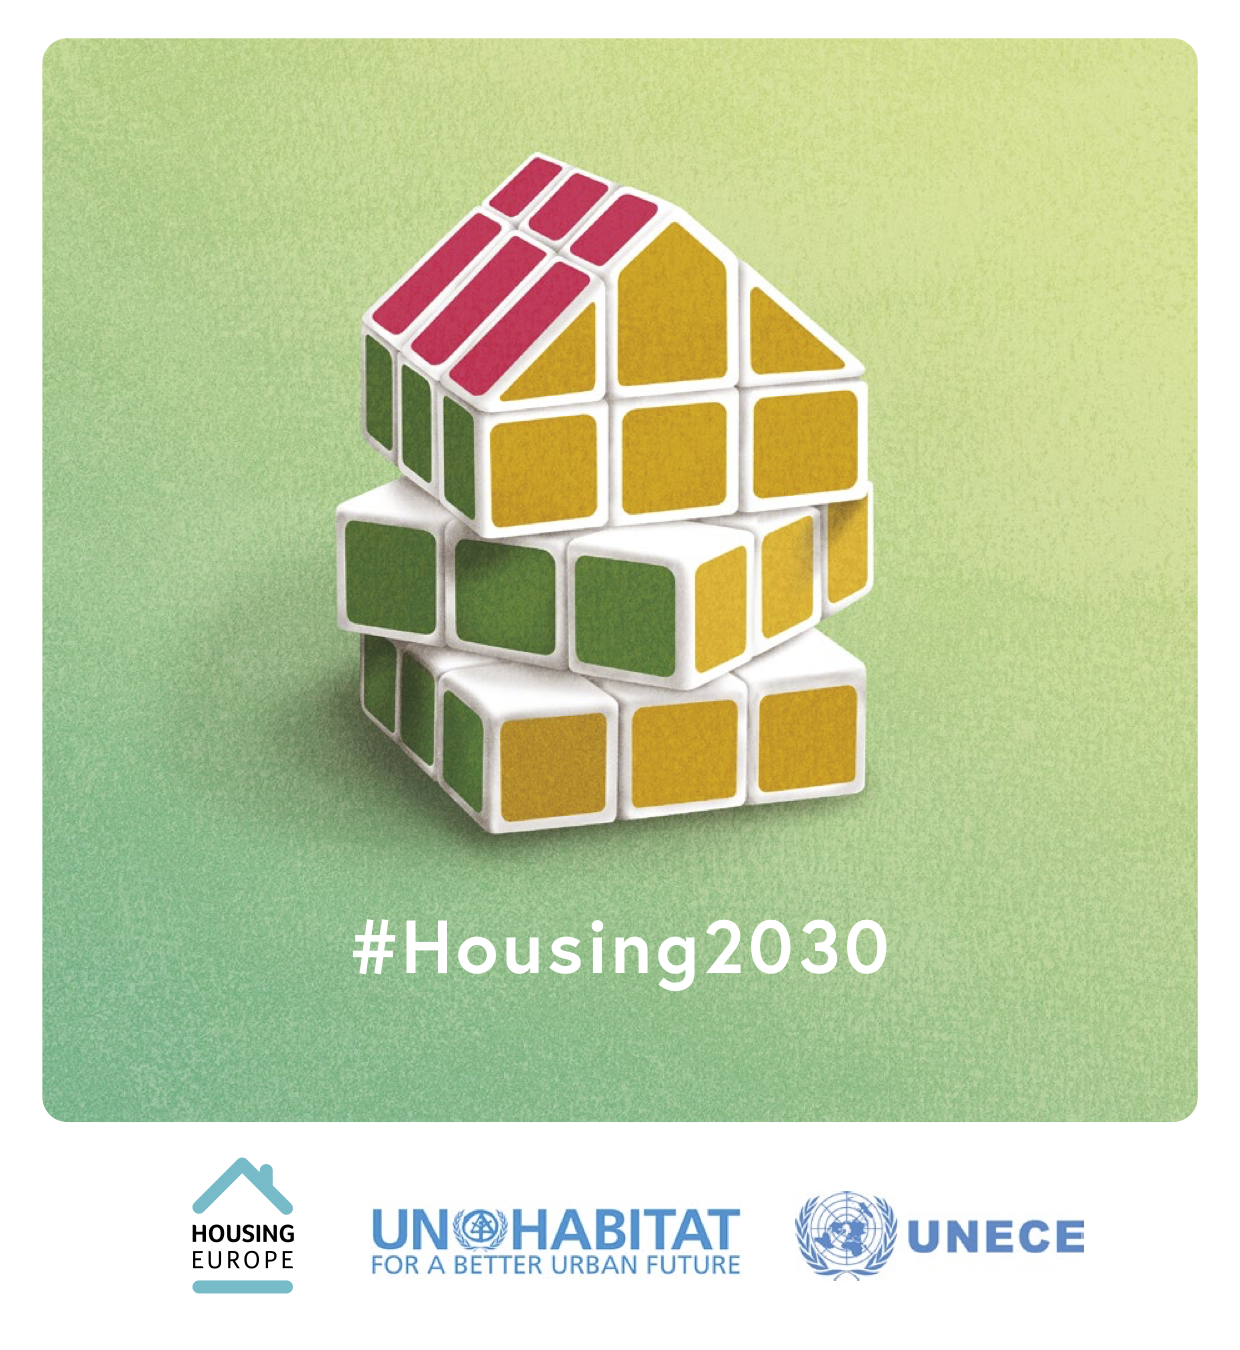  #Housing2030 initiative to promote affordable housing in Europe